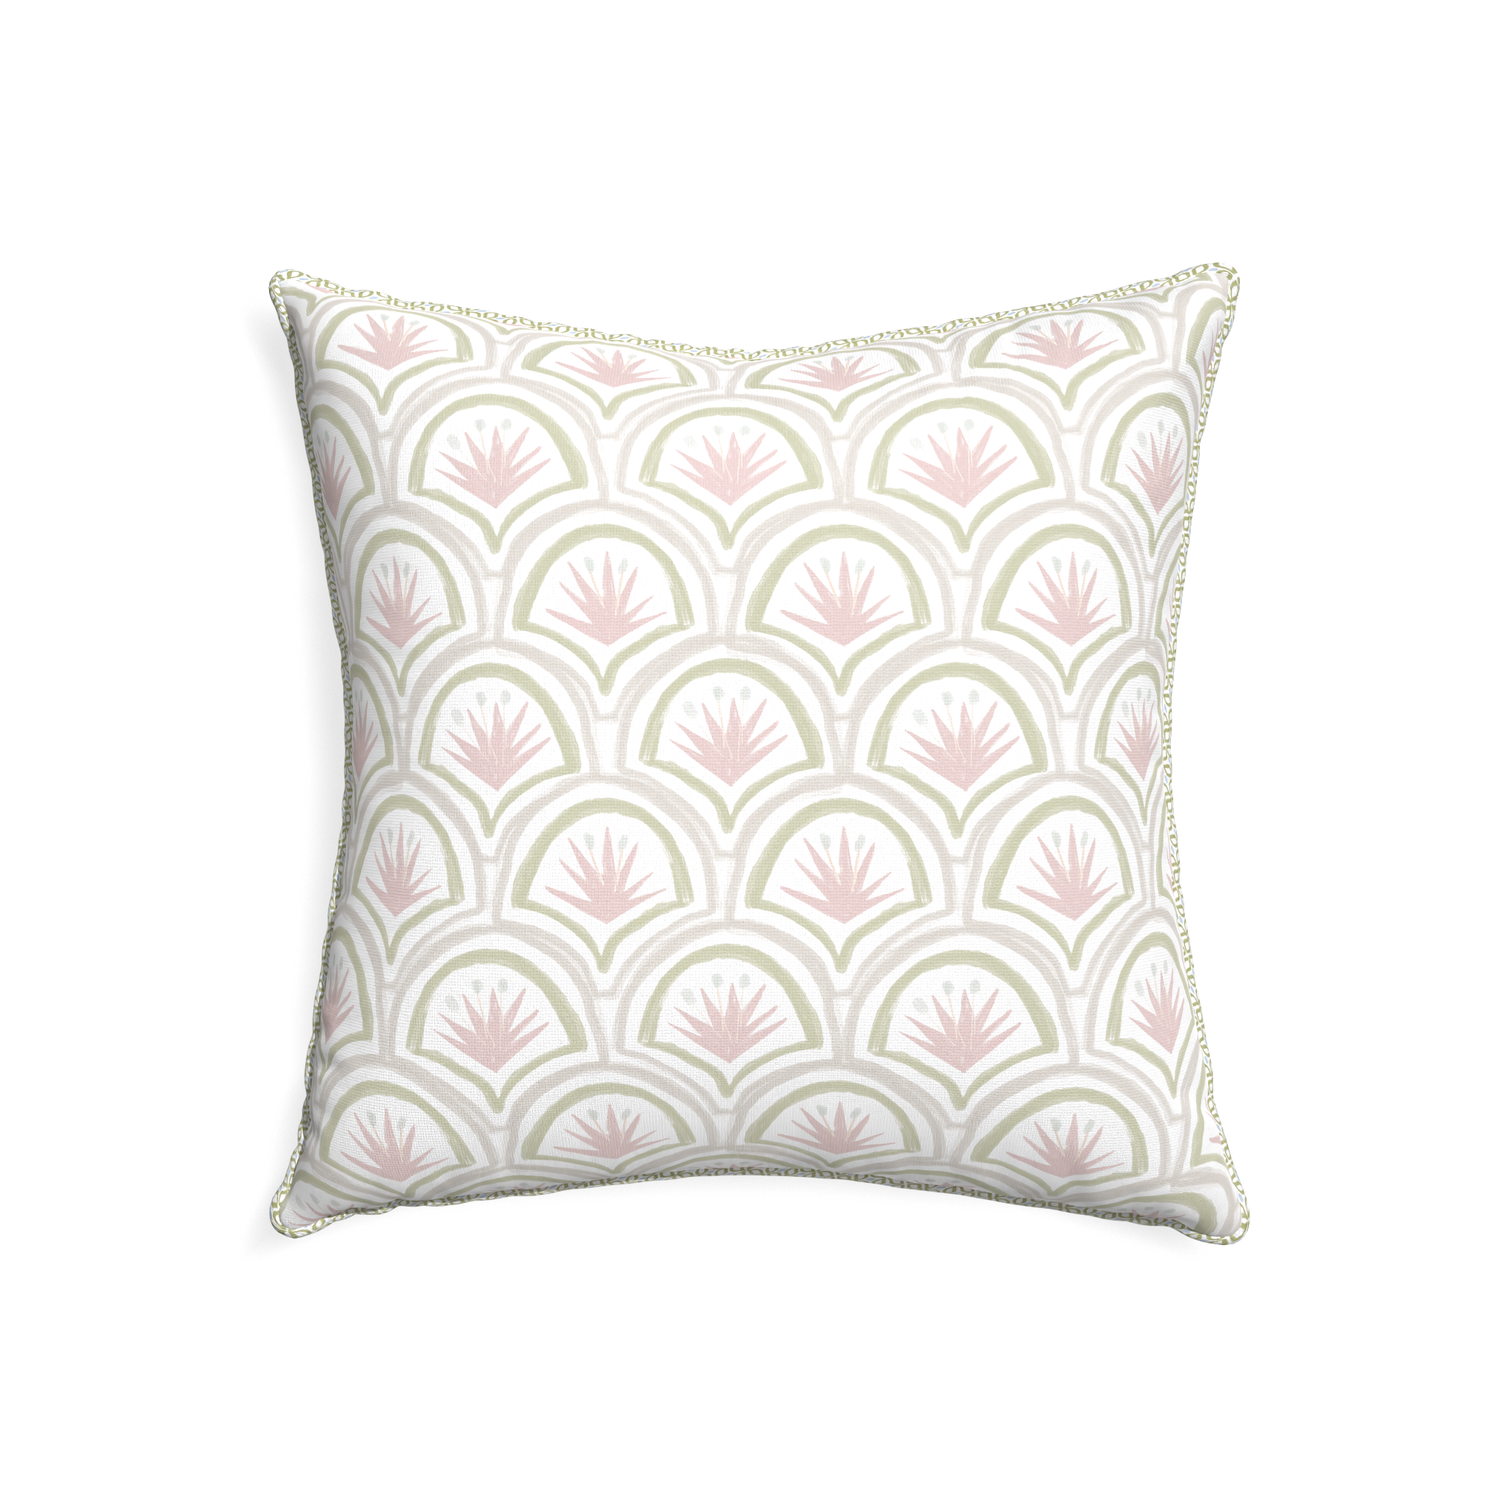 22-square thatcher rose custom pillow with l piping on white background